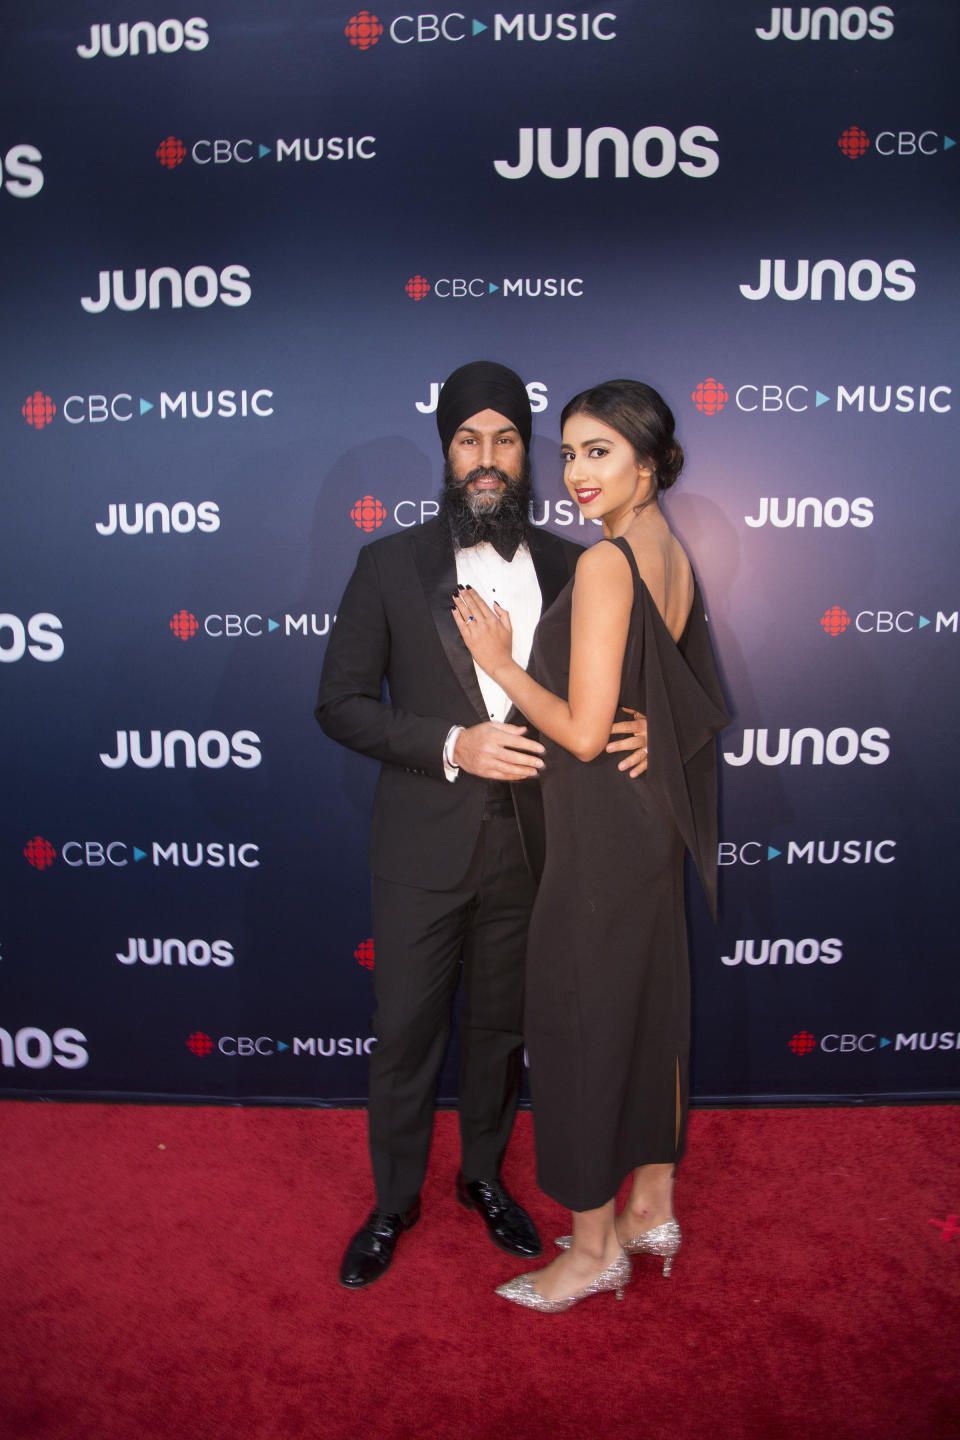 The couple welcomed their first baby a year and a half ago. (Photo by Phillip Chin/Getty Images) VANCOUVER, BC - MARCH 25: (L-R) NDP Federal Leader Jagmeet Singh and Gurkiran Kaur attend the red carpet arrivals at the 2018 Juno Awards at Rogers Arena on March 25, 2018 in Vancouver, Canada. (Photo by Phillip Chin/Getty Images)